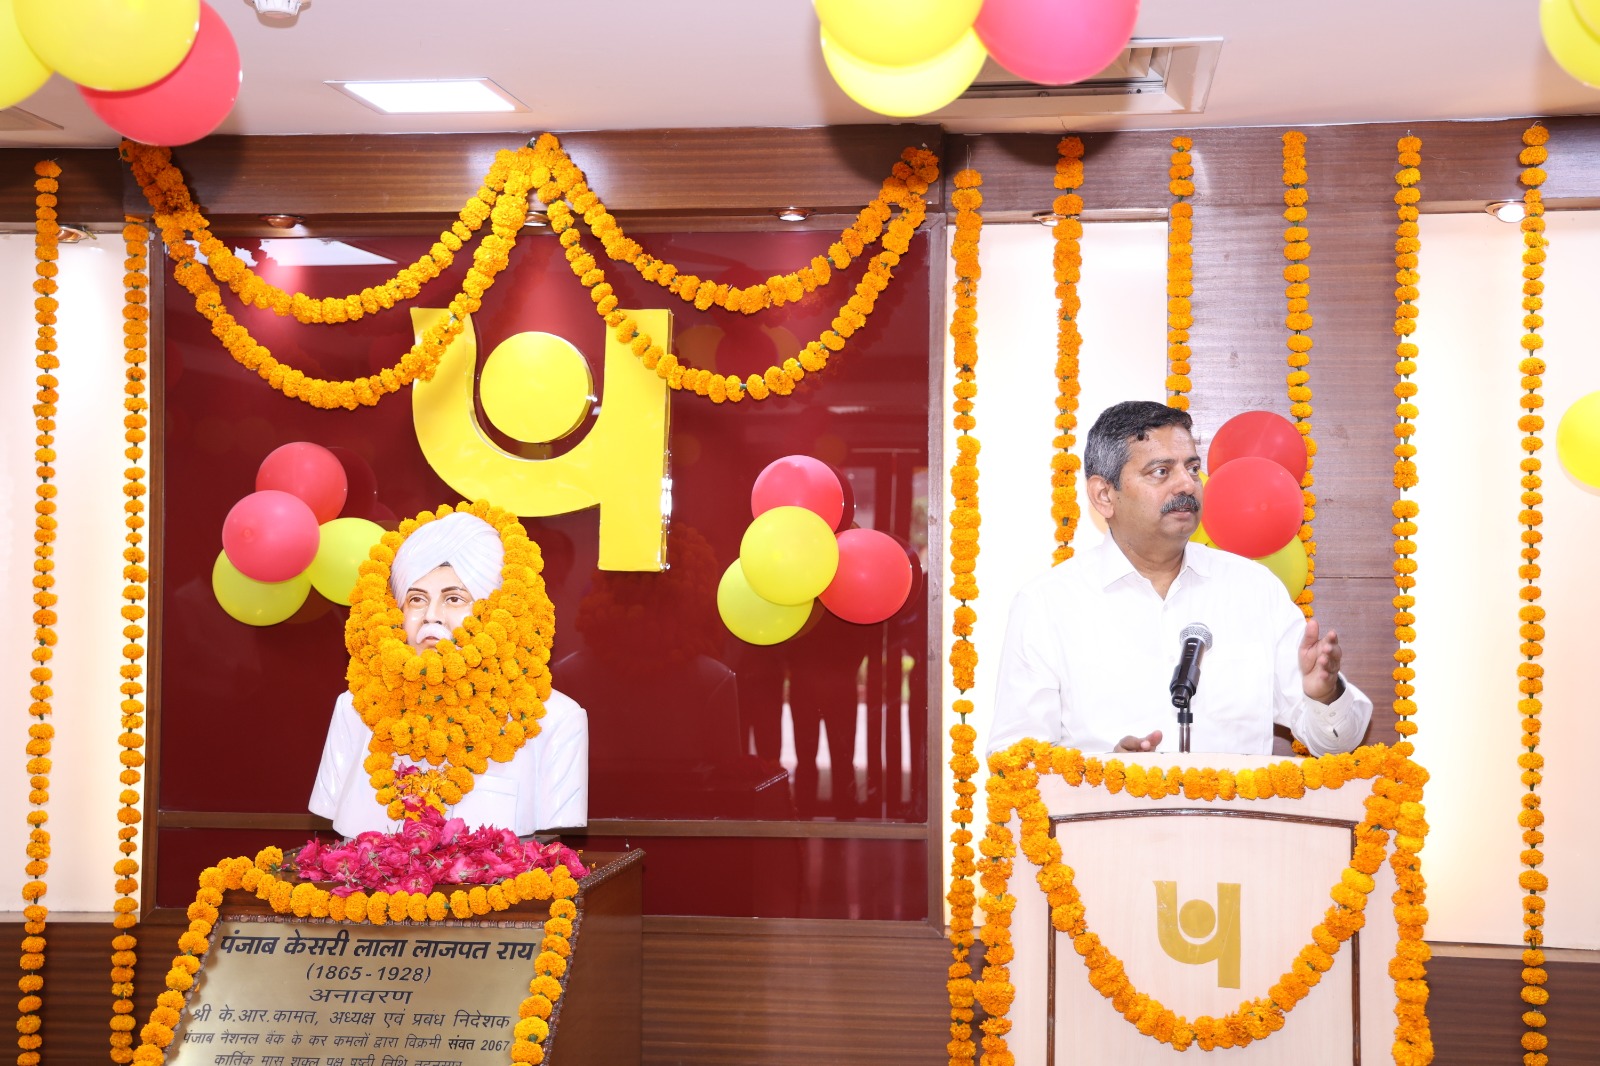 PNB celebrated 130th foundation day